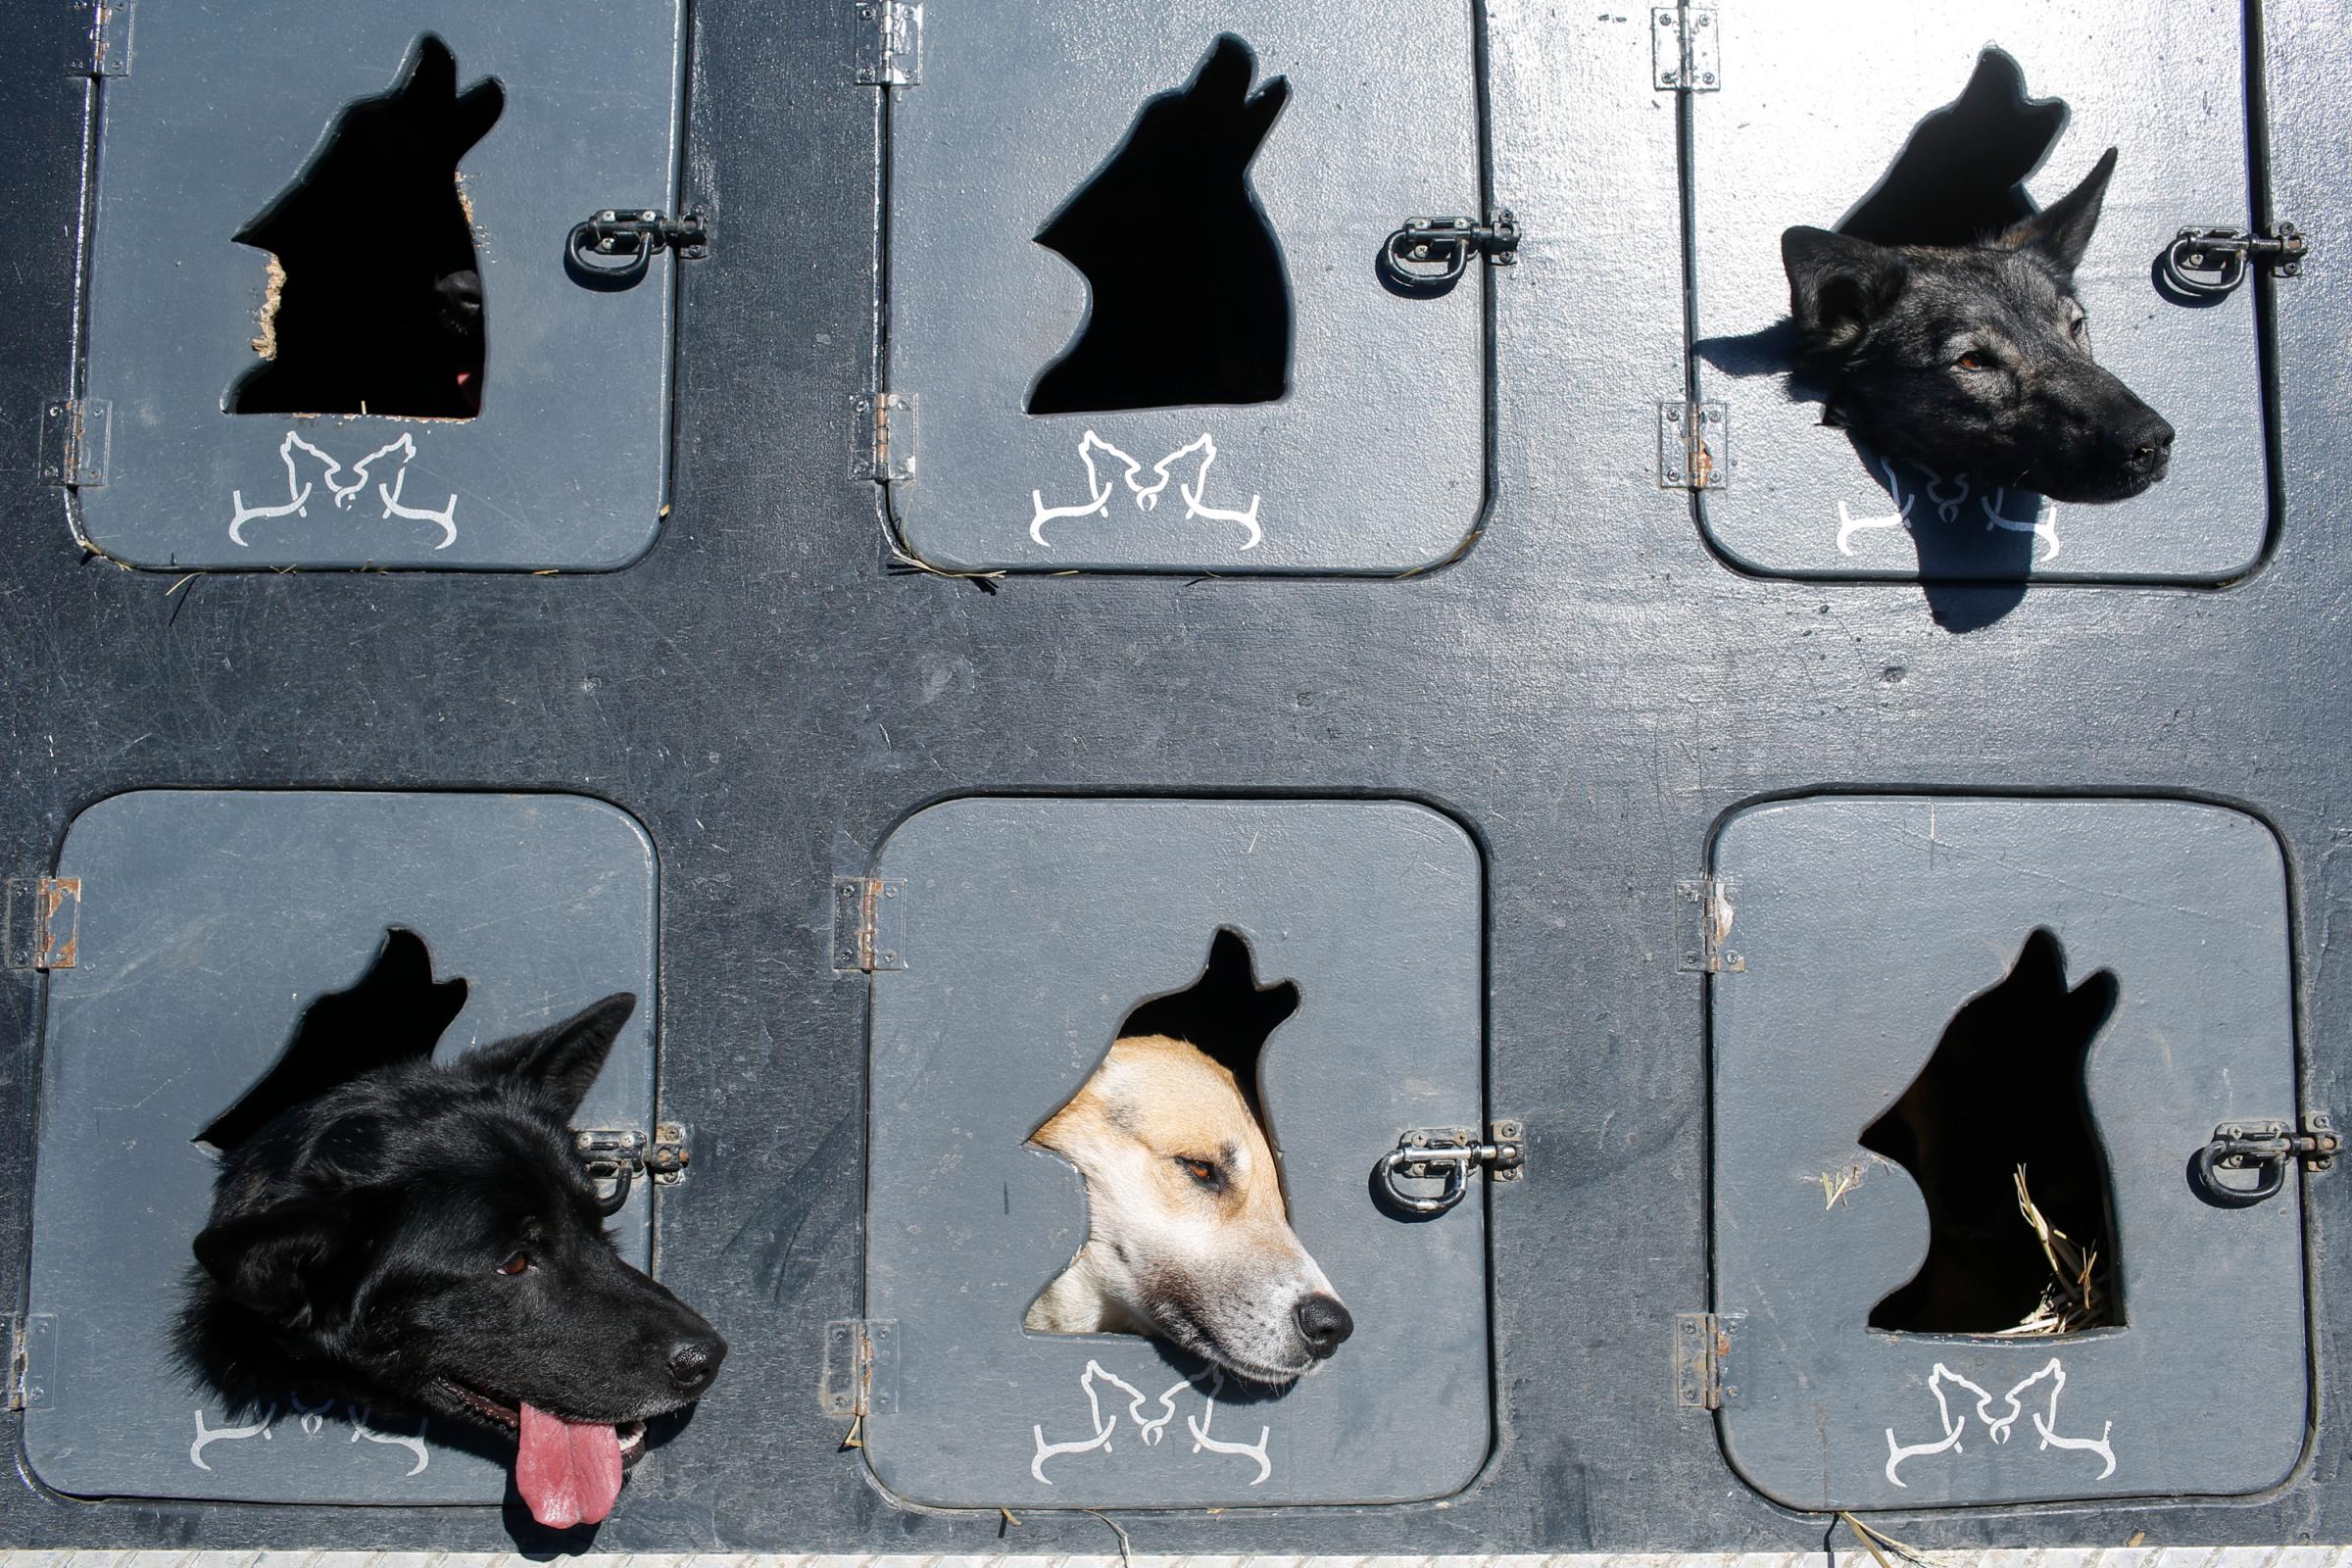 Musher Justin Savidis' dogs wait in the truck before the restart of the Iditarod Trail Sled Dog Race in Willow, Alaska, on March 6, 2016.